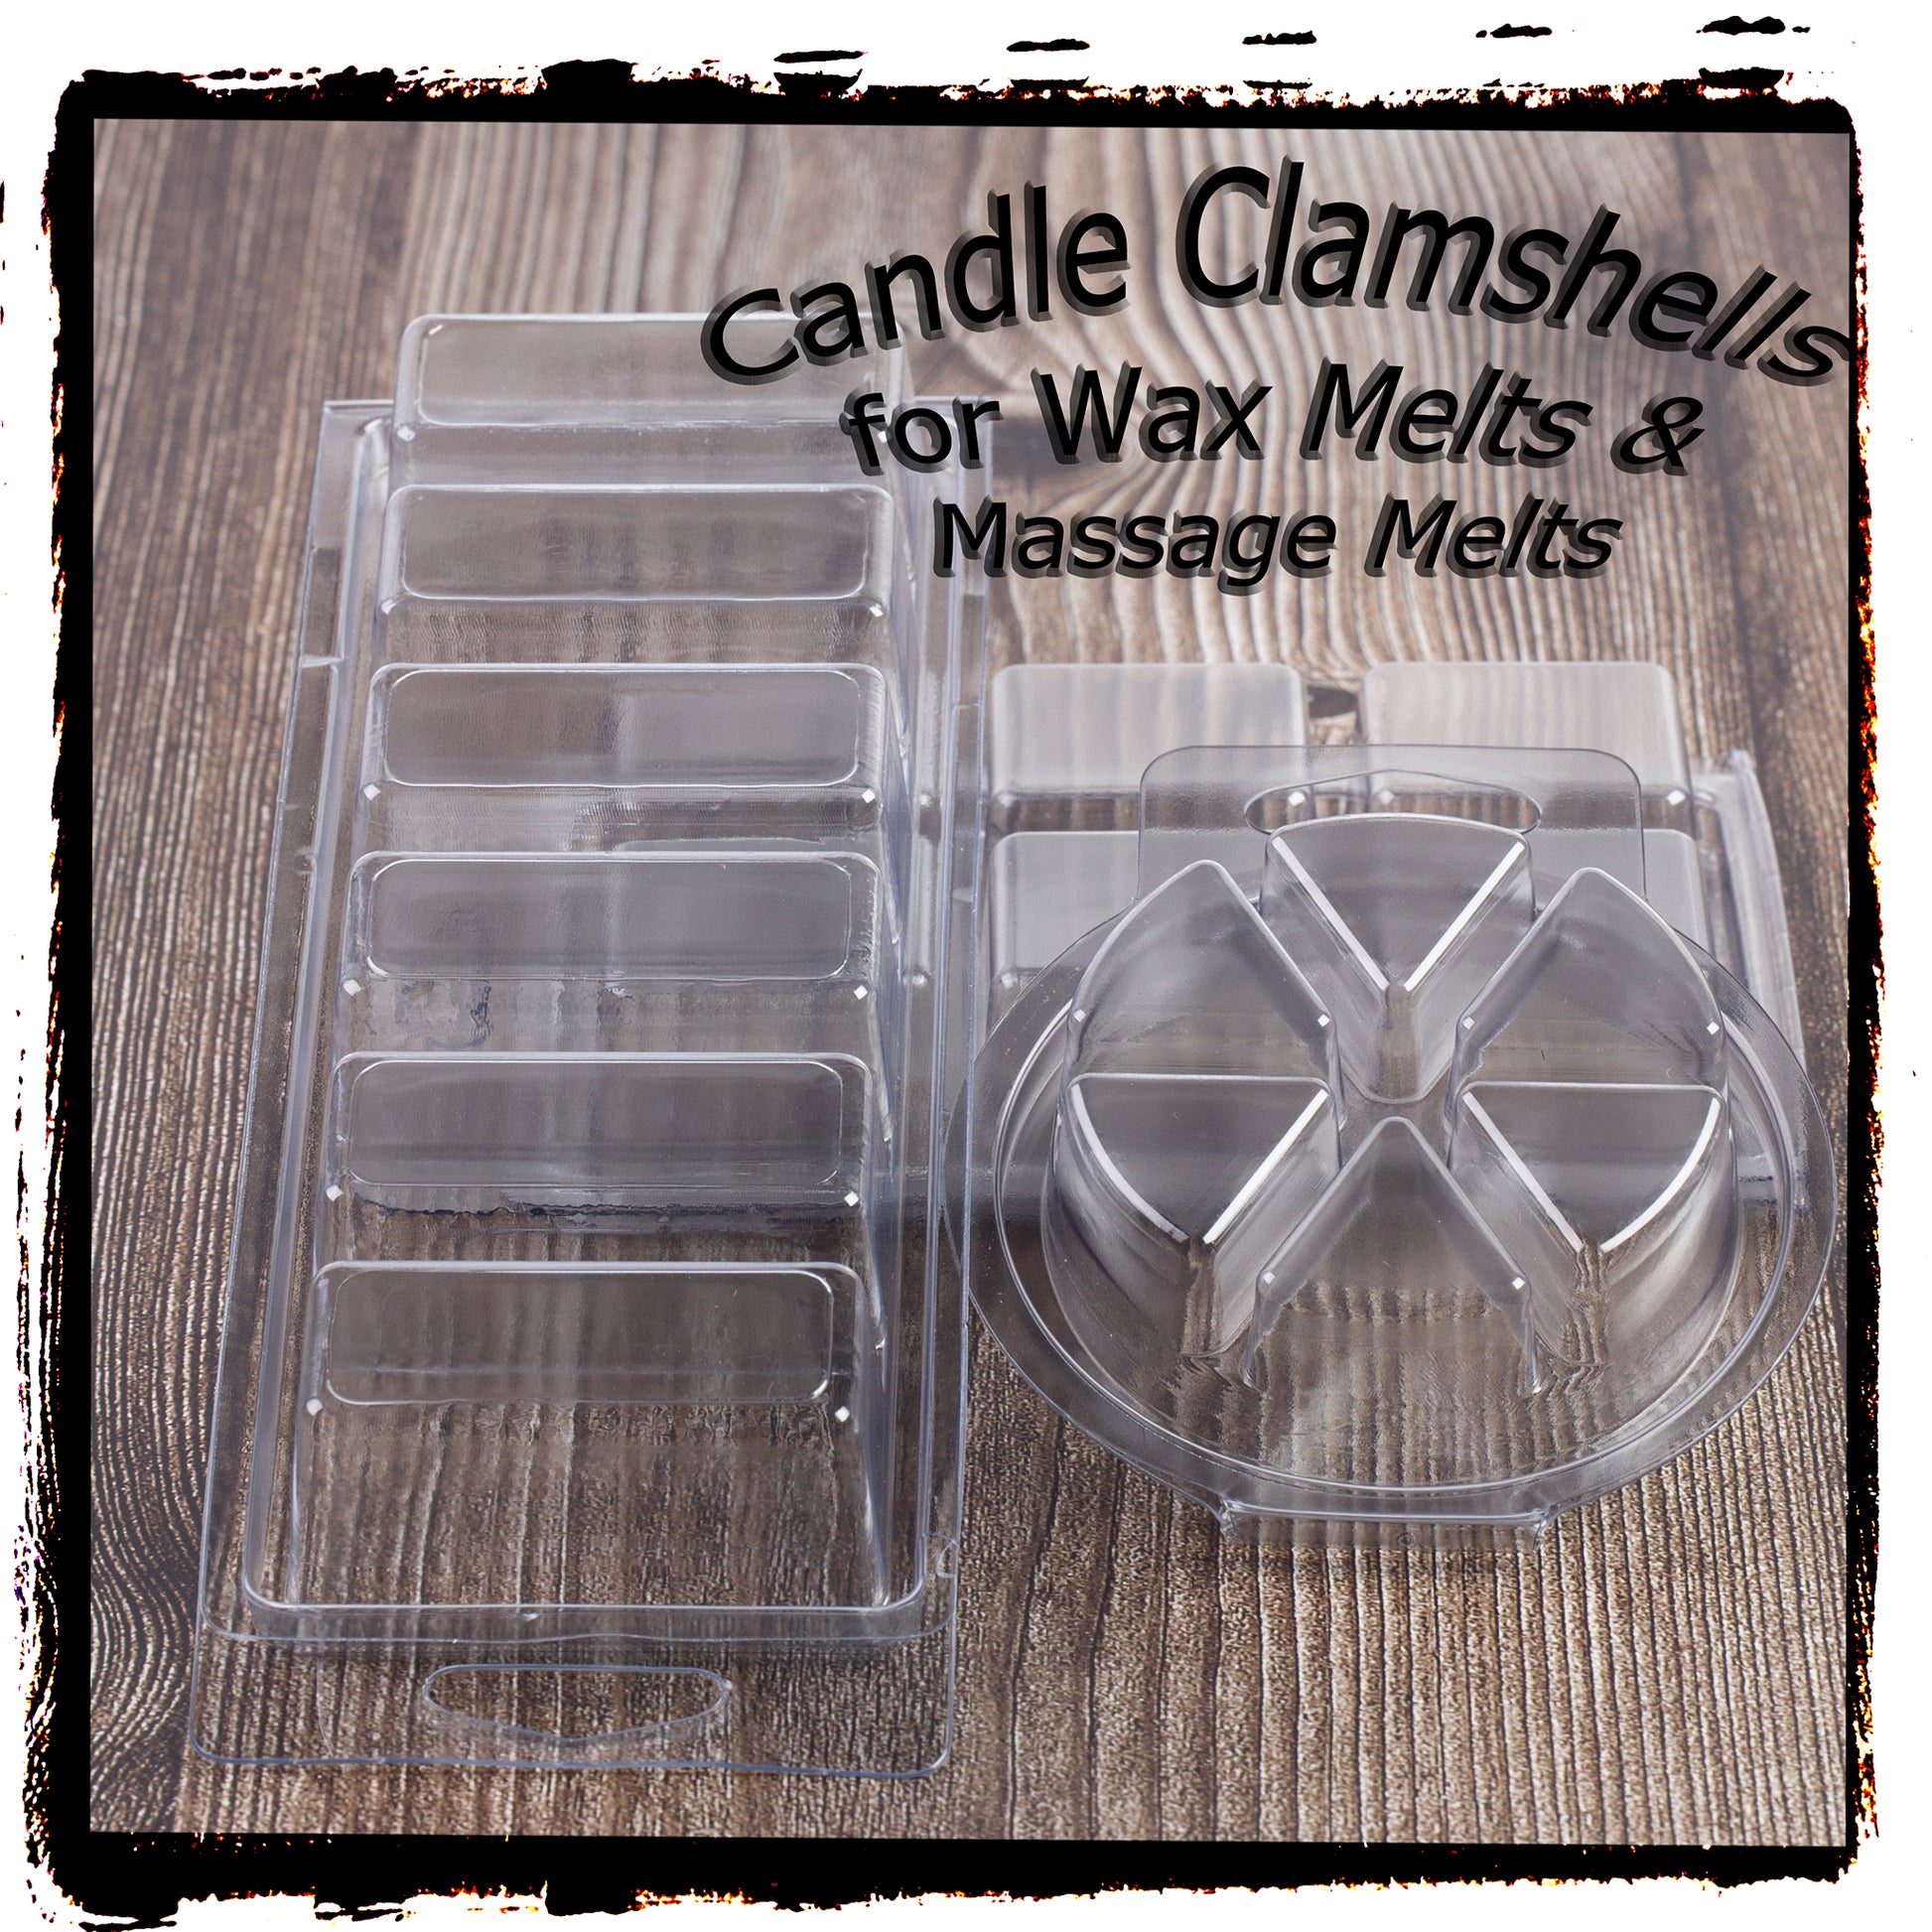 Plastic Clear Candle Blister Packaging Wax Melt Molds Clamshell - China  Plastic Candle Packaging, Wax Melt Clamshell